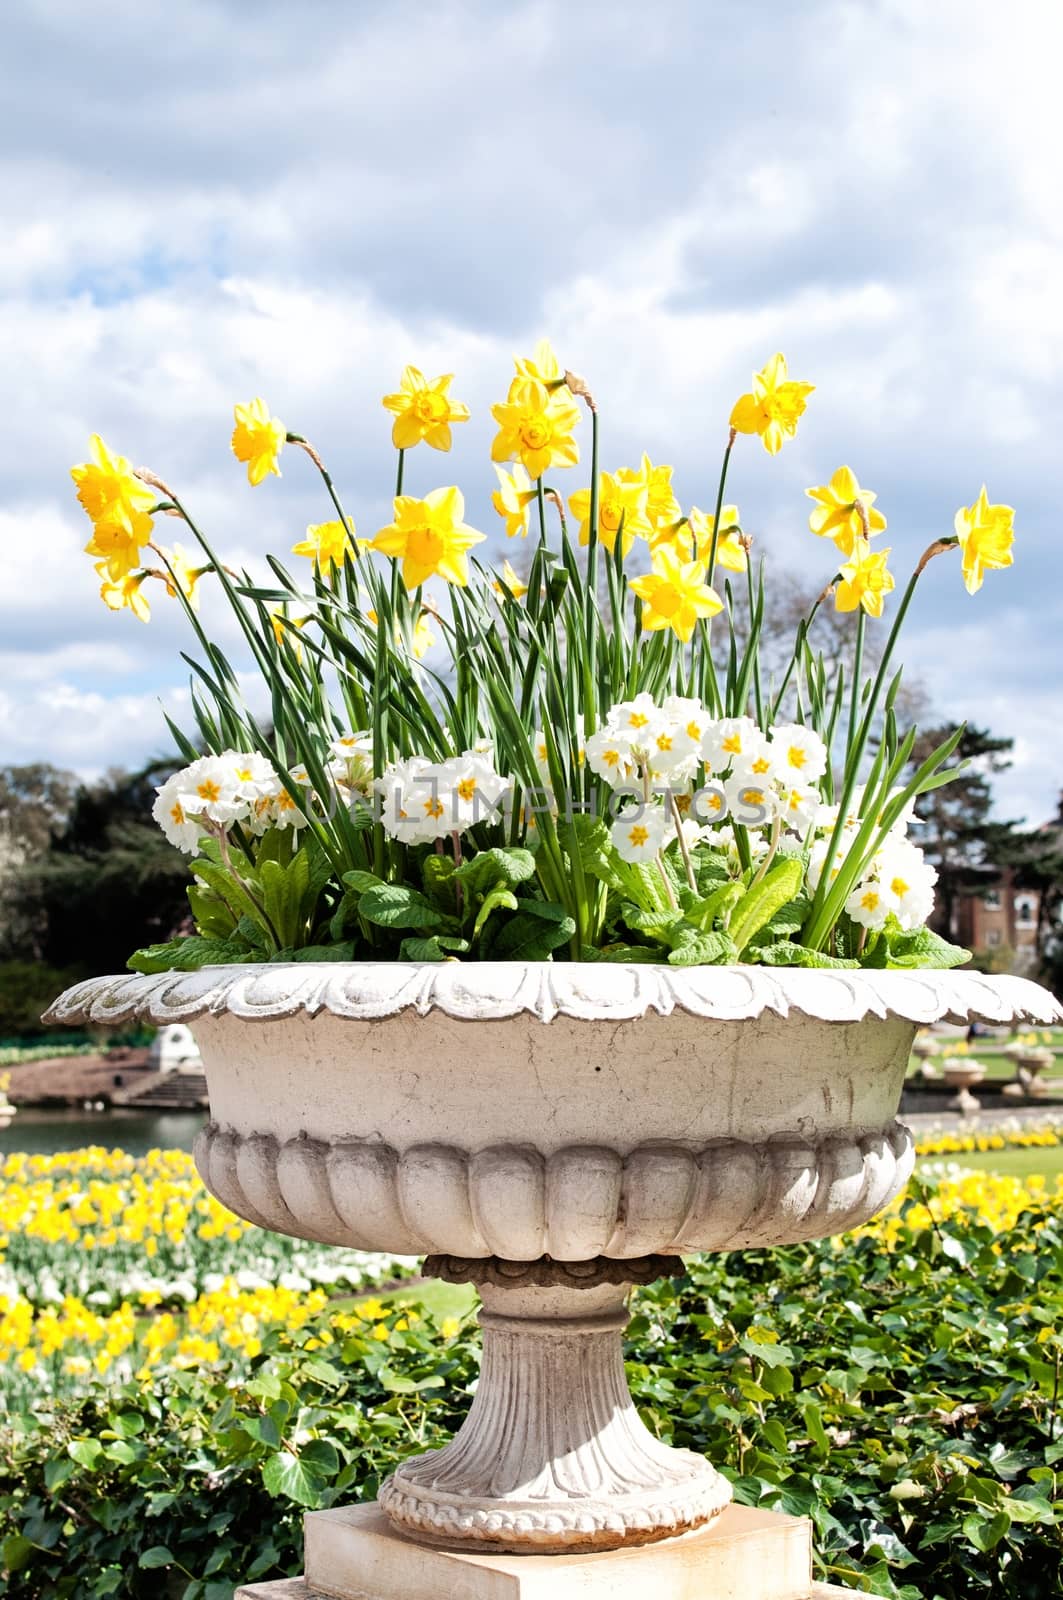 Decorated stone pot of daffodils and primroses in the park